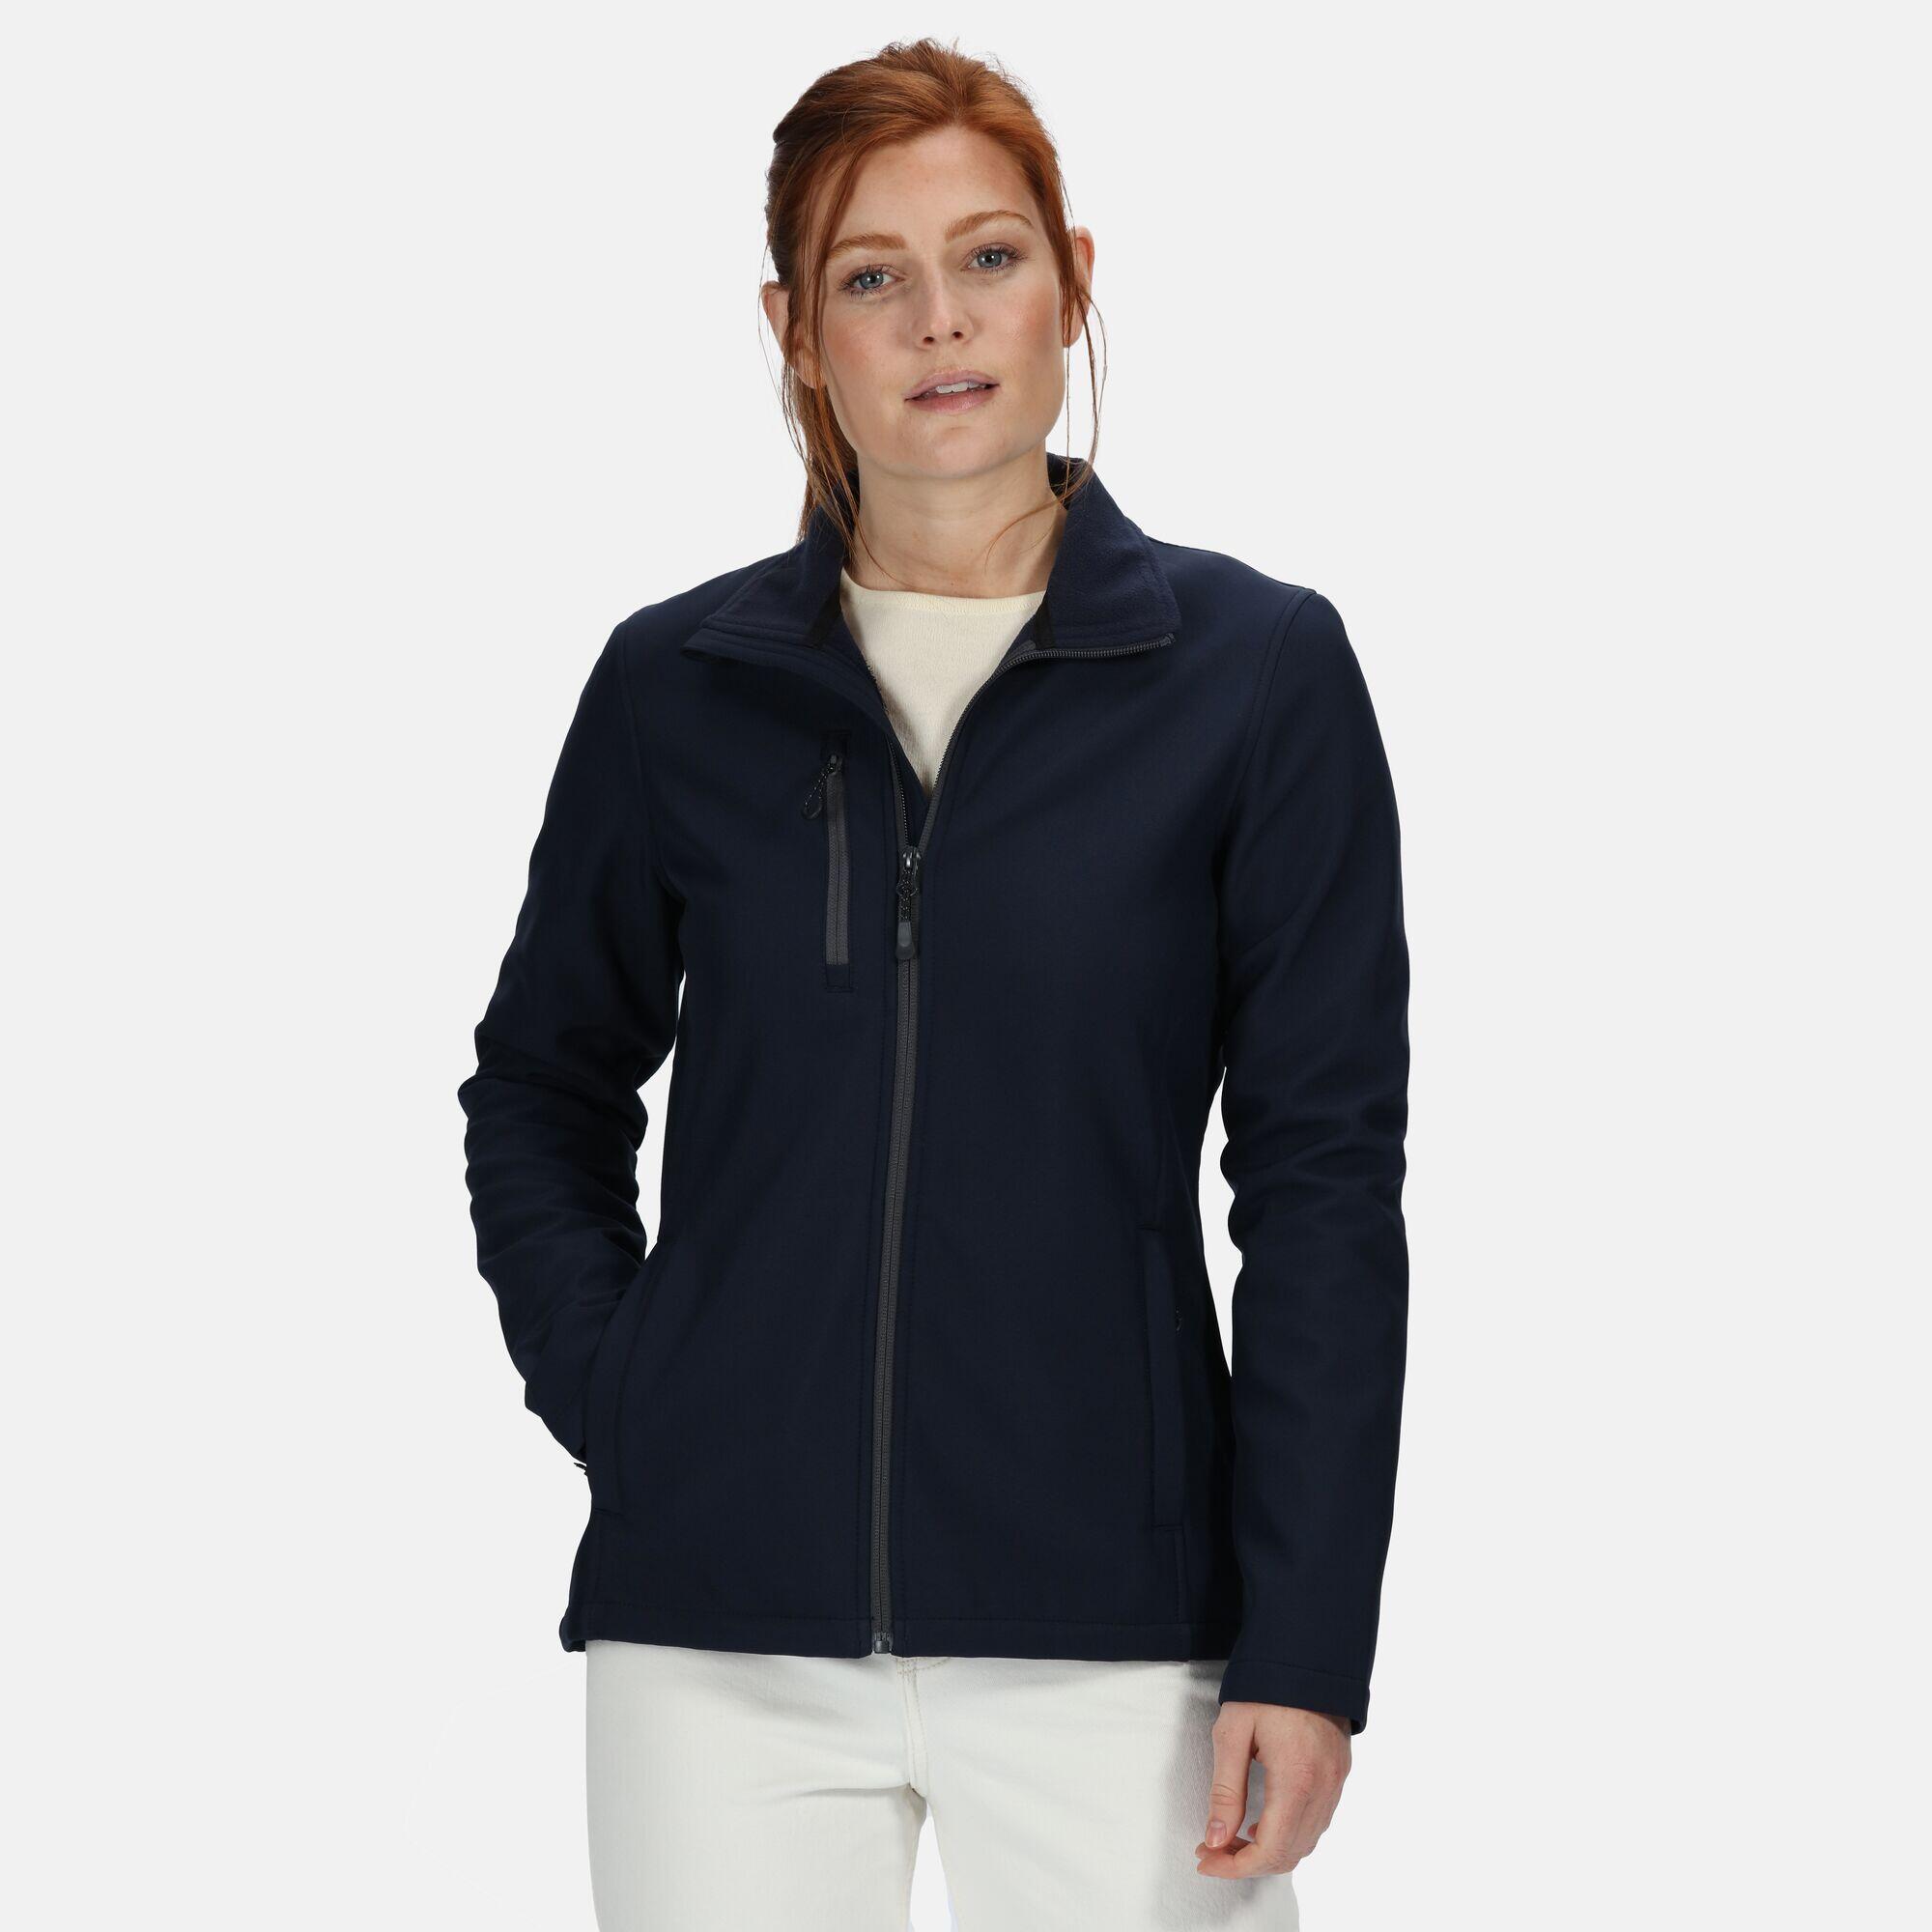 Womens/Ladies Honestly Made Recycled Fleece (Navy) 4/5